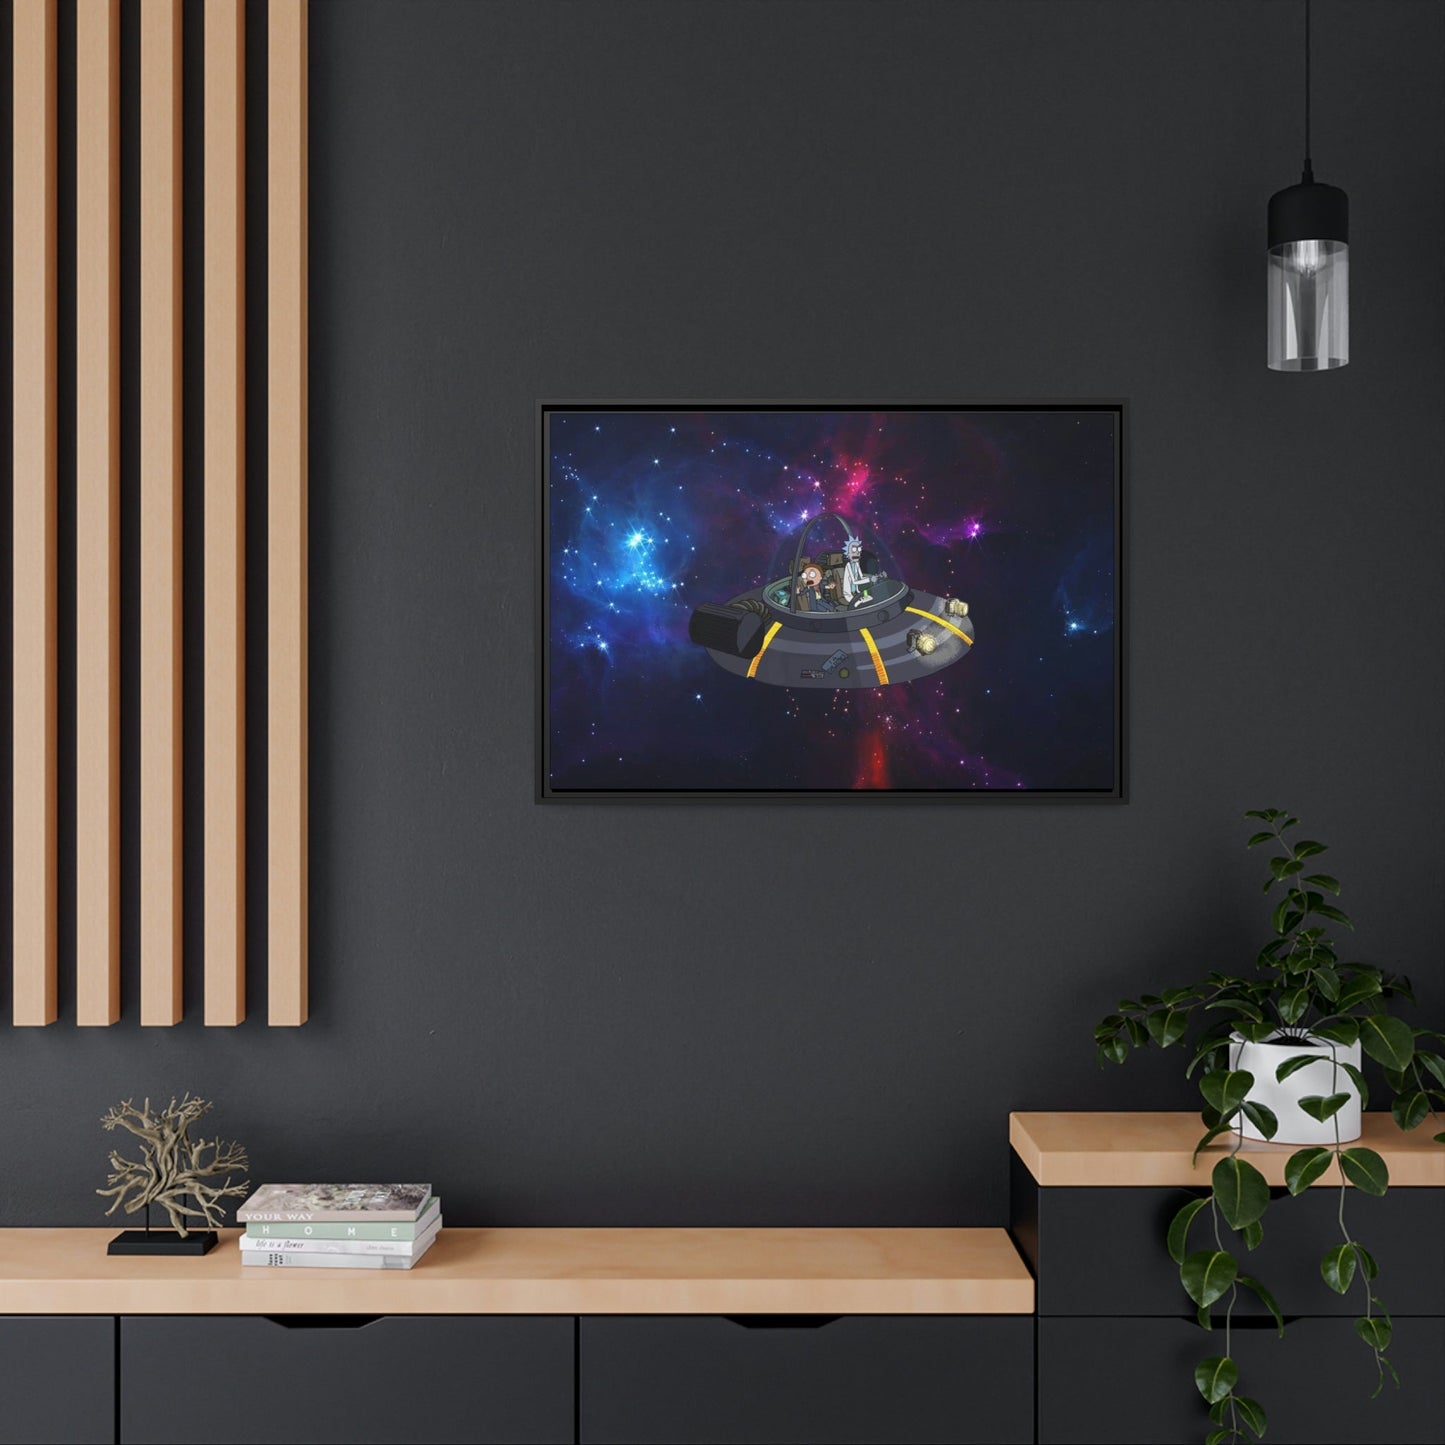 Vivid Imagination: Rick and Morty Poster Art on Canvas for a Dynamic Wall Art Display